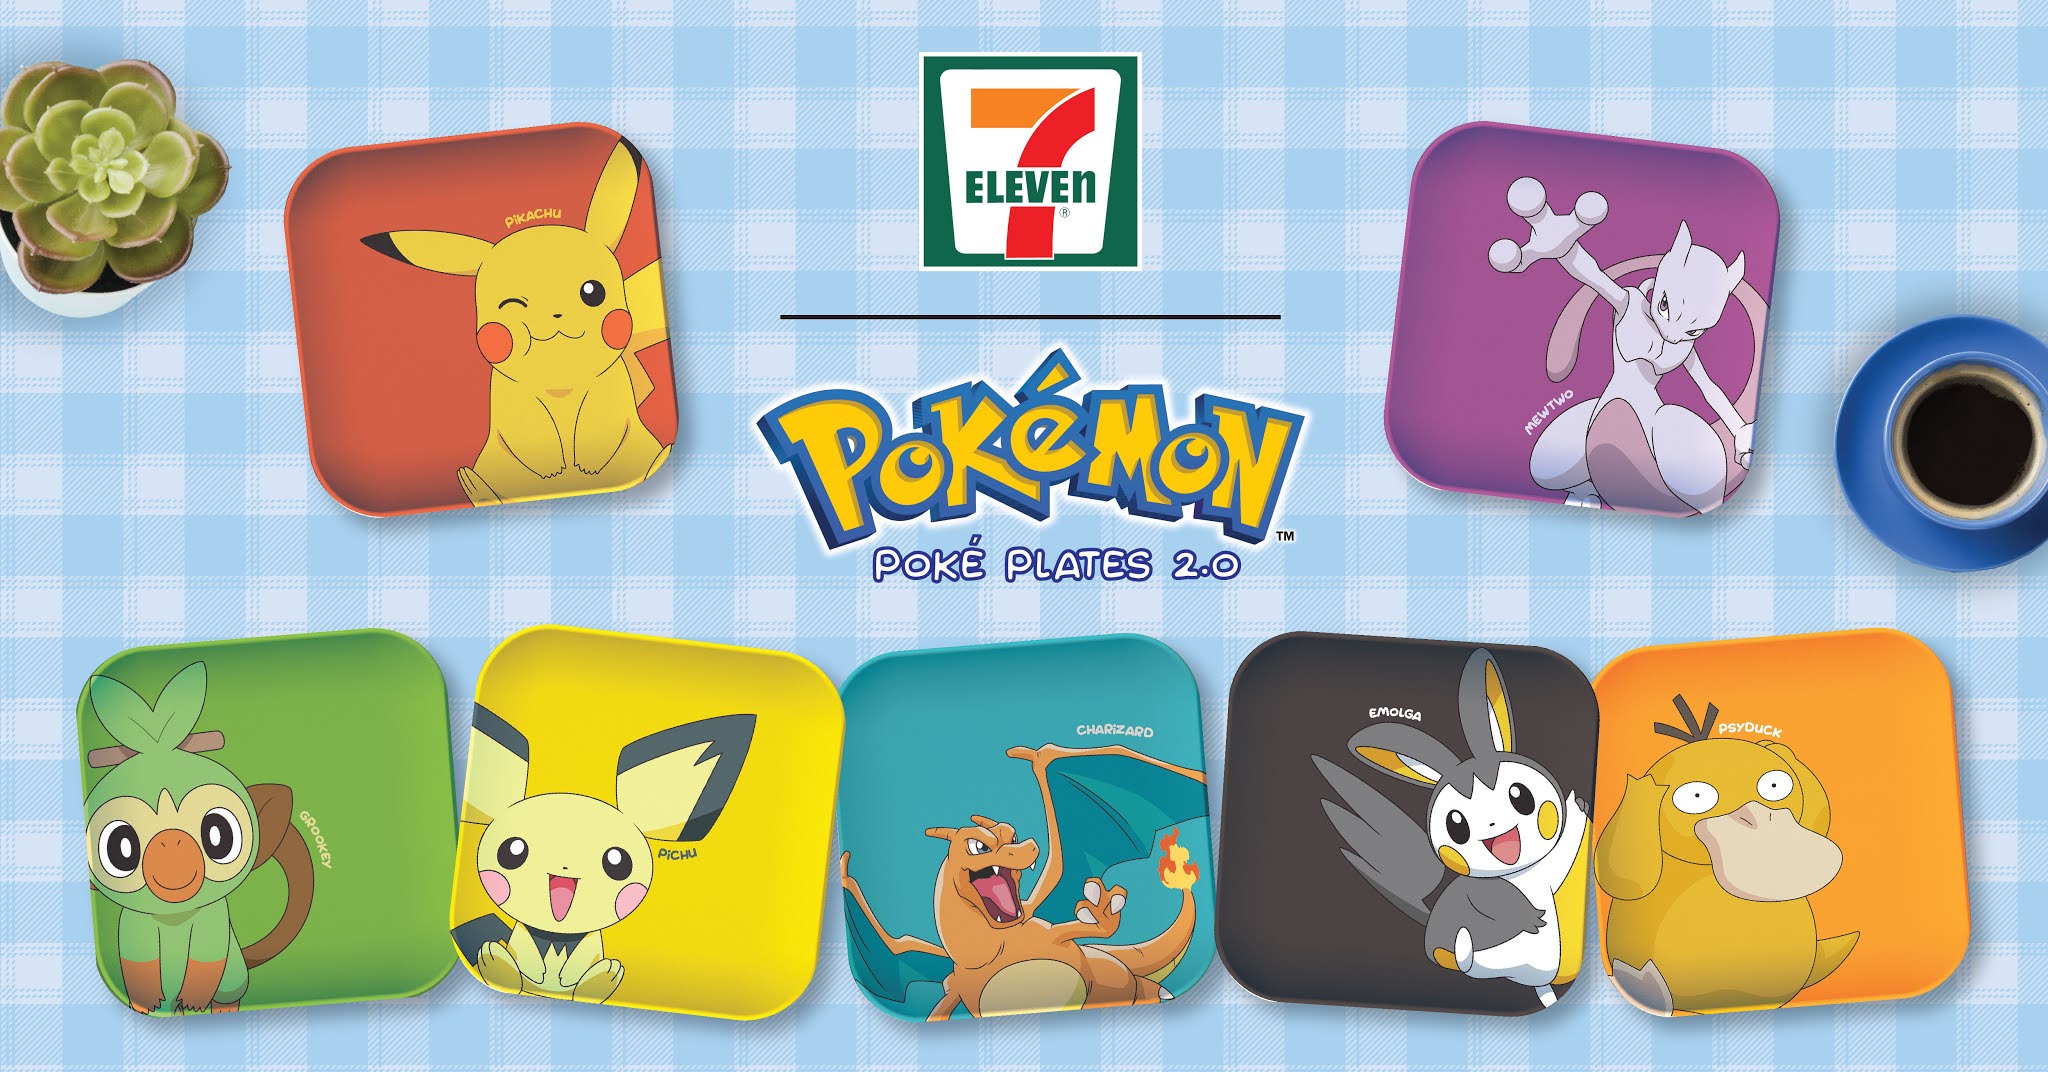 Jom Hunt Down These Irresistible Pokemon Poke Plates 2 0 At 7 Eleven Malaysia Mouse Mommy Treats